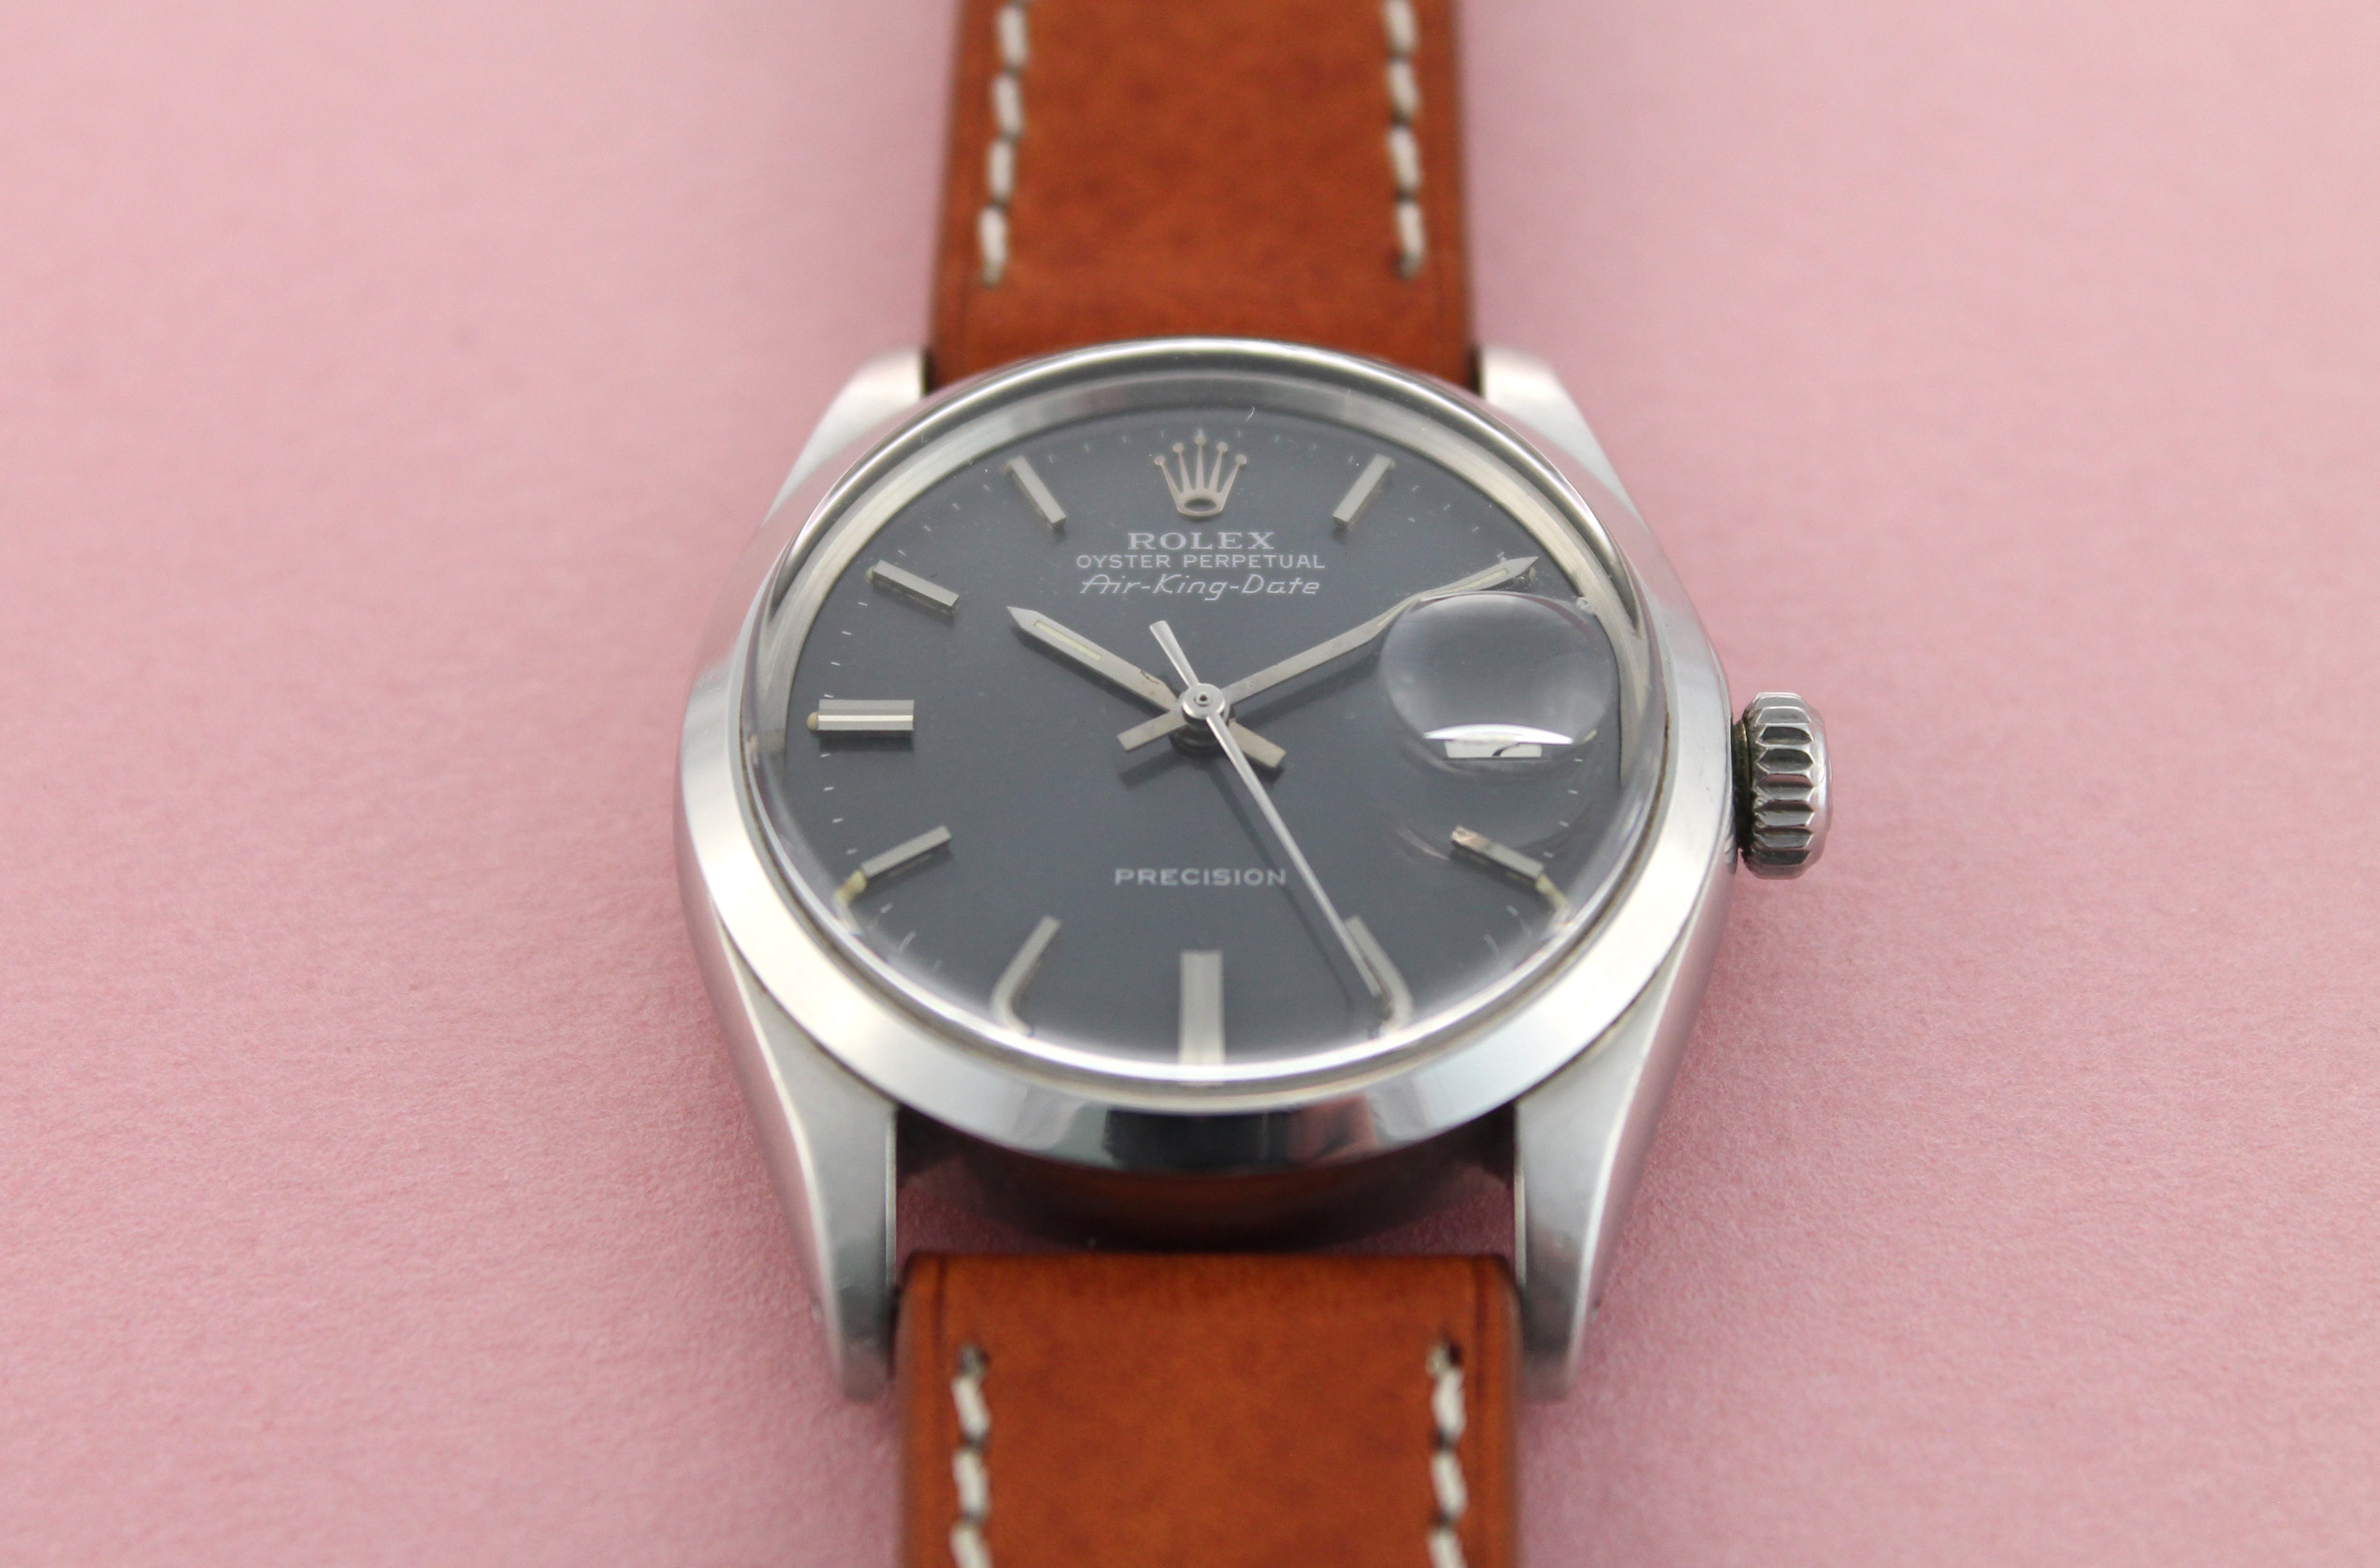 ROLEX Oyster Perpetual Air King Date Ref 5700 (1972)